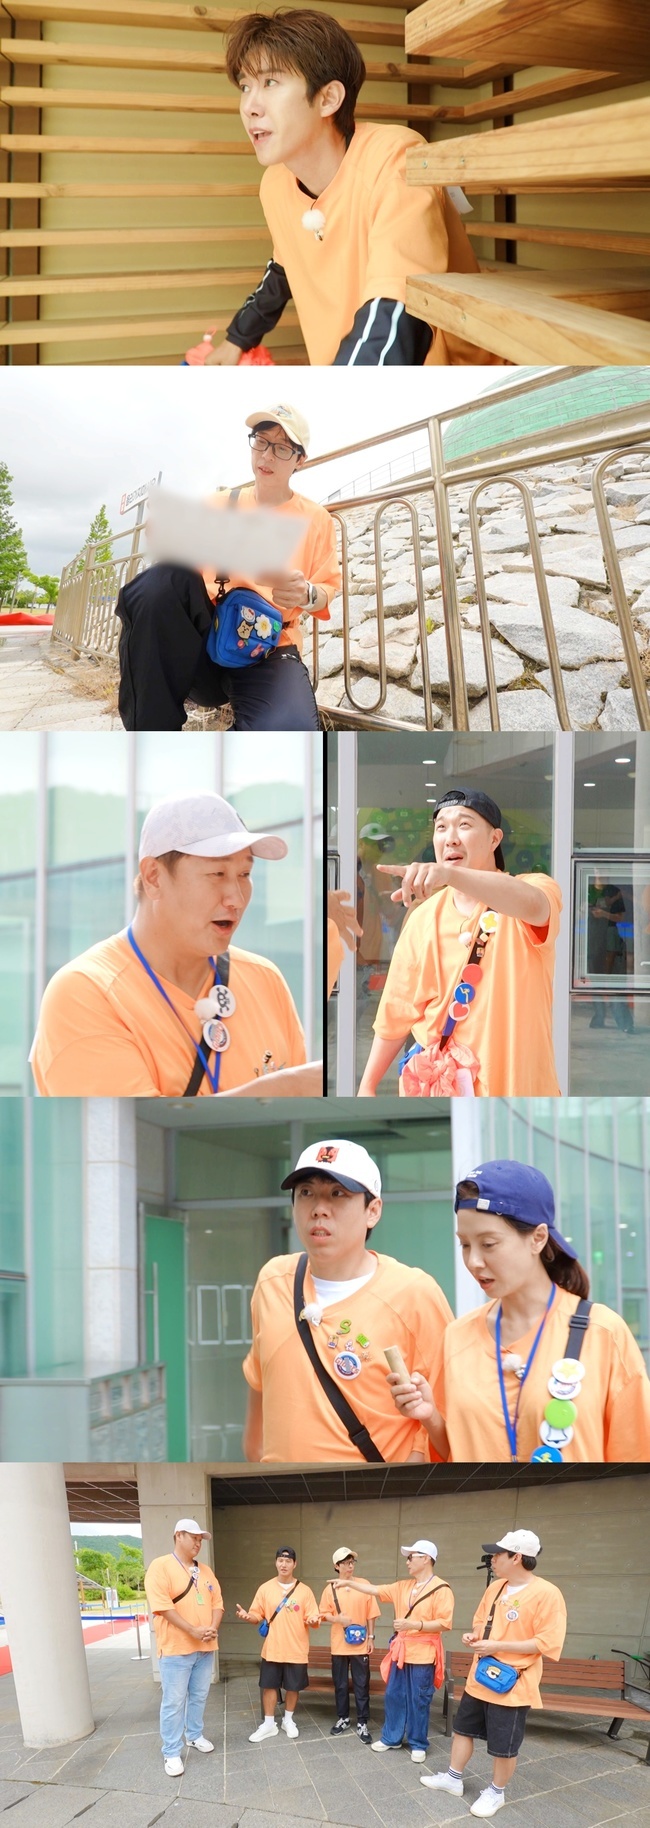 The production team of SBS entertainment  ⁇  Running Man  ⁇  announced the performance of actor Song Ji-hyo.According to SBS on July 9, Running Man, which is broadcasted on this day, will be followed by a series of Murder, She Wrote X chases filled with confusion and fear.In the meantime,  ⁇ Running Man ⁇  has provided extreme immersion through various Murder, She Wrote special features such as  ⁇ Running Man ⁇ ,  ⁇ Running Man ⁇ ,  ⁇ Running Man ⁇ , and  ⁇ Race ⁇ , and  ⁇ Running Man ⁇  Murder, She Wrote Race has become a signature race that viewers trust and see.Murder, She Wrote X, a trailer that combines the pursuit of last weeks broadcast, was released, and online, a huge variety that combines suspense and entertainment, the root of  ⁇  Running Man comes  ⁇   ⁇   ⁇   ⁇ ,  ⁇  Scale There were hot reactions.This week marks the birth of another legend race with the first Running Skout.Members and guests Lee Dae-Ho and Kwang-hee were invited to the 1st Running Skout  ⁇  to challenge the badge collection mission.The members were fiercely competing in the news that the badges they won could be exchanged for prize money, but the members were surprised when the prize money quickly burned.In the process of uncovering the hidden realities, the unfolding of twists and confusions until the end is expected to arouse great curiosity among viewers. ⁇  Murder, She Wrote Ace  ⁇  Yoo Jae-Suk showed  ⁇   ⁇   ⁇   ⁇   ⁇   ⁇   ⁇   ⁇   ⁇   ⁇   ⁇   ⁇   ⁇   ⁇   ⁇   ⁇   ⁇   ⁇   ⁇   ⁇   ⁇   ⁇   ⁇   ⁇   ⁇   ⁇   ⁇   ⁇   ⁇   ⁇   ⁇  Murder, She Wrote Hint at once.Gwang-hee could not hide his excitement, saying that he was taking a mission-impossible shot, and ran away with his unique agility and set Hint on his own.Lee Dae-Ho also searched everywhere and tried to escape. He played more than he did when he was playing baseball. Its too hard.On the other hand, Song Ji-hyo said that he shook the plate of Race with Murder, She Wrote power which can not catch. ⁇  1st RunningSkout  ⁇  In the fictional world view, members can escape safely at  ⁇  Running Man  ⁇  which is broadcasted at 6:15 pm on this day.